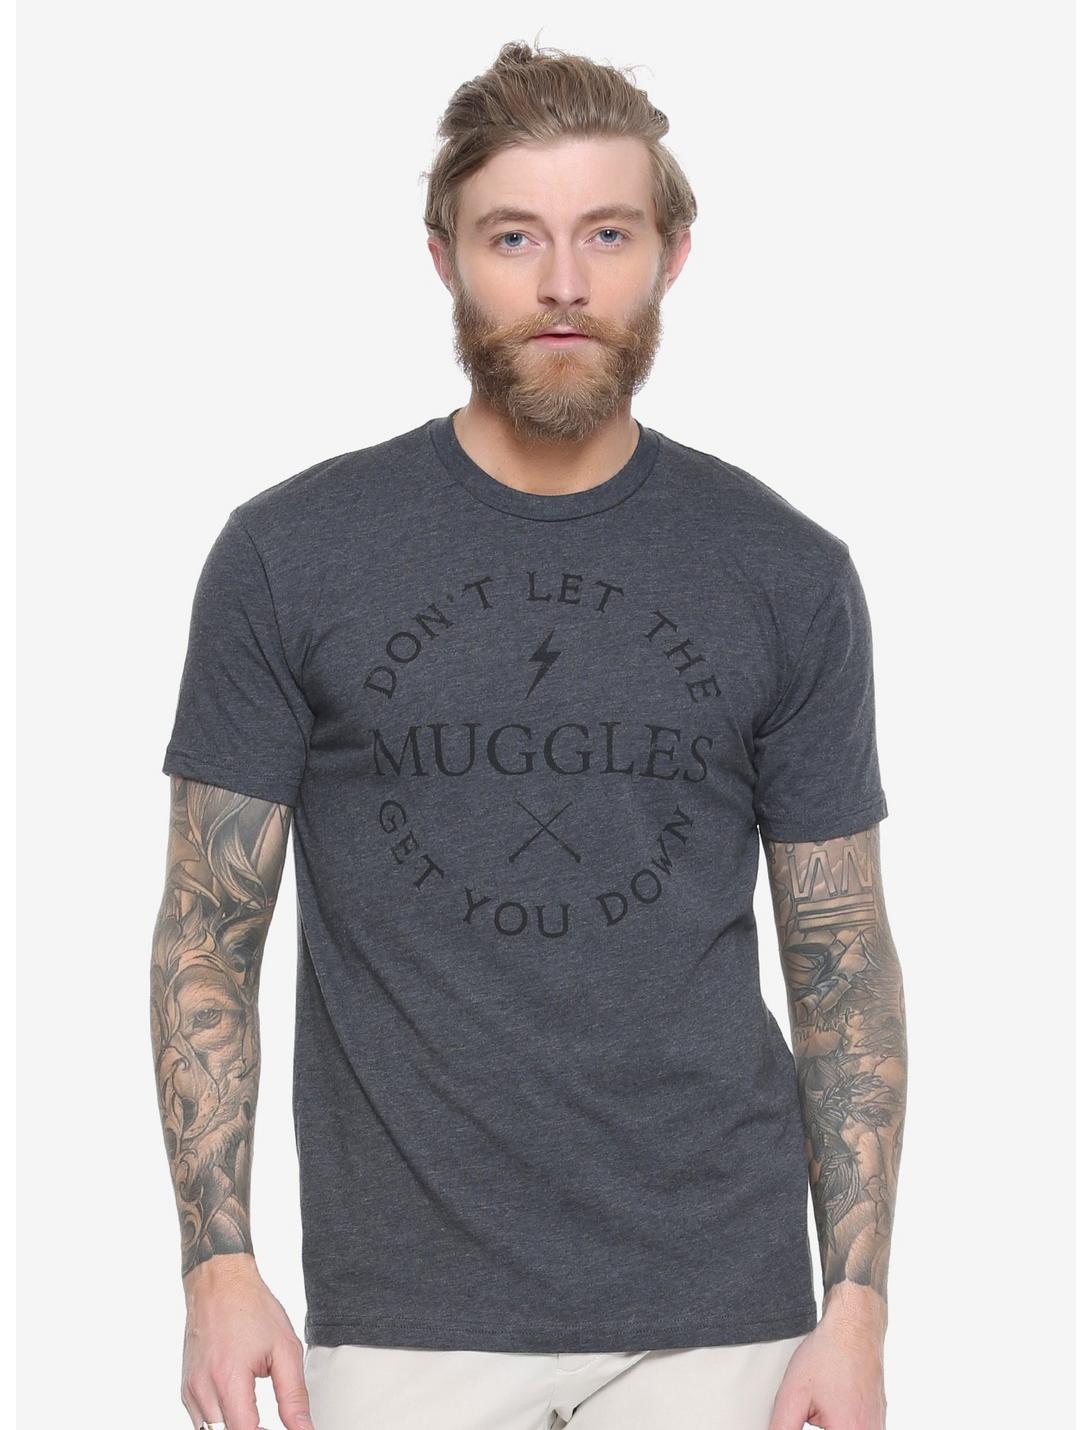 Harry Potter Muggles T-Shirt - BoxLunch Exclusive | BoxLunch